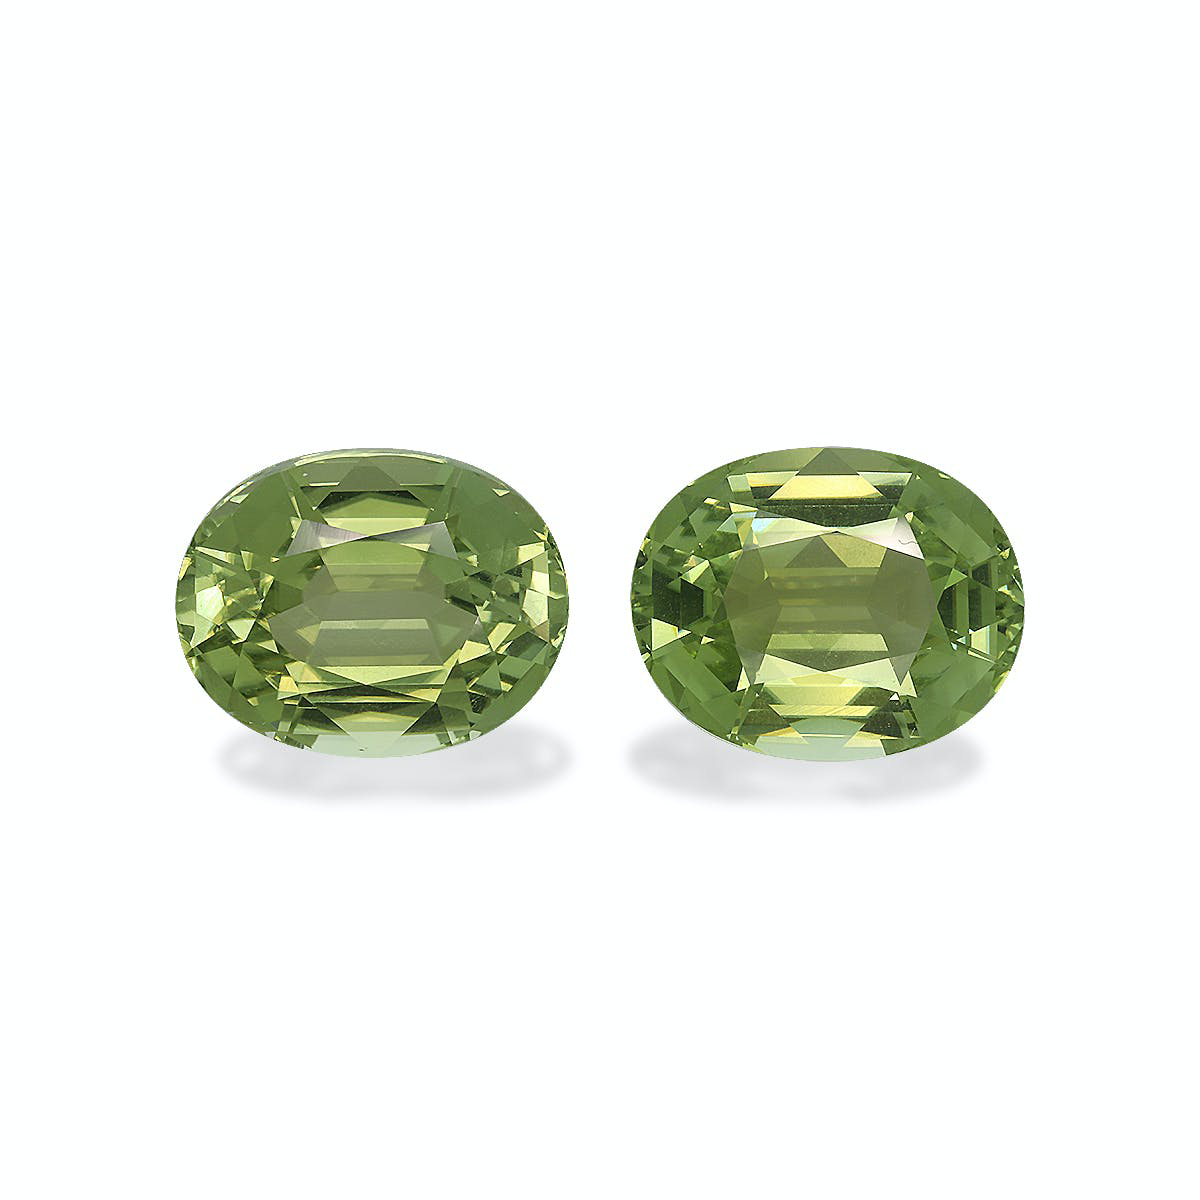 Picture of Pale Green Cuprian Tourmaline 21.69ct - Pair (MZ0224)